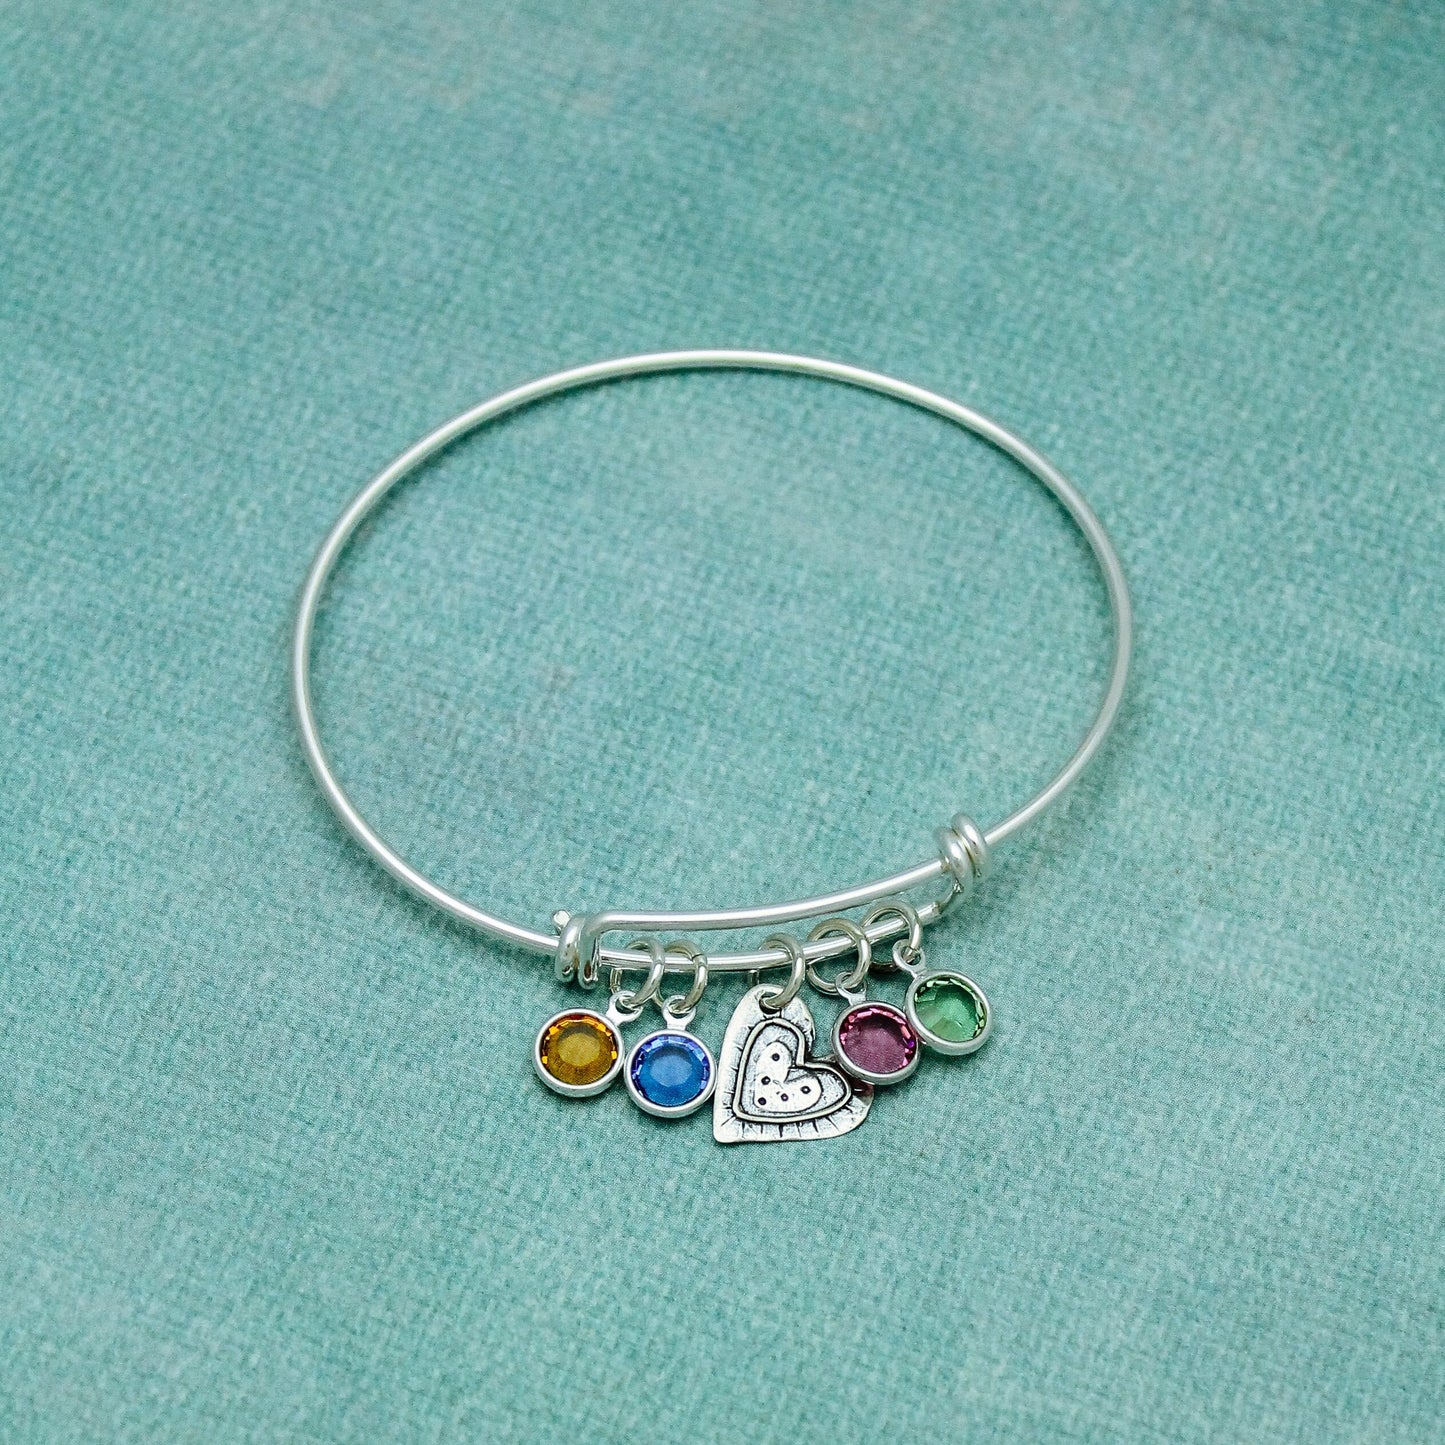 Cute Heart Sterling Silver Bangle, Silver Heart with Birthstones Bracelet, Mother's Birthstone Bangle, Grandmother Bracelet, Mom's Day Gift